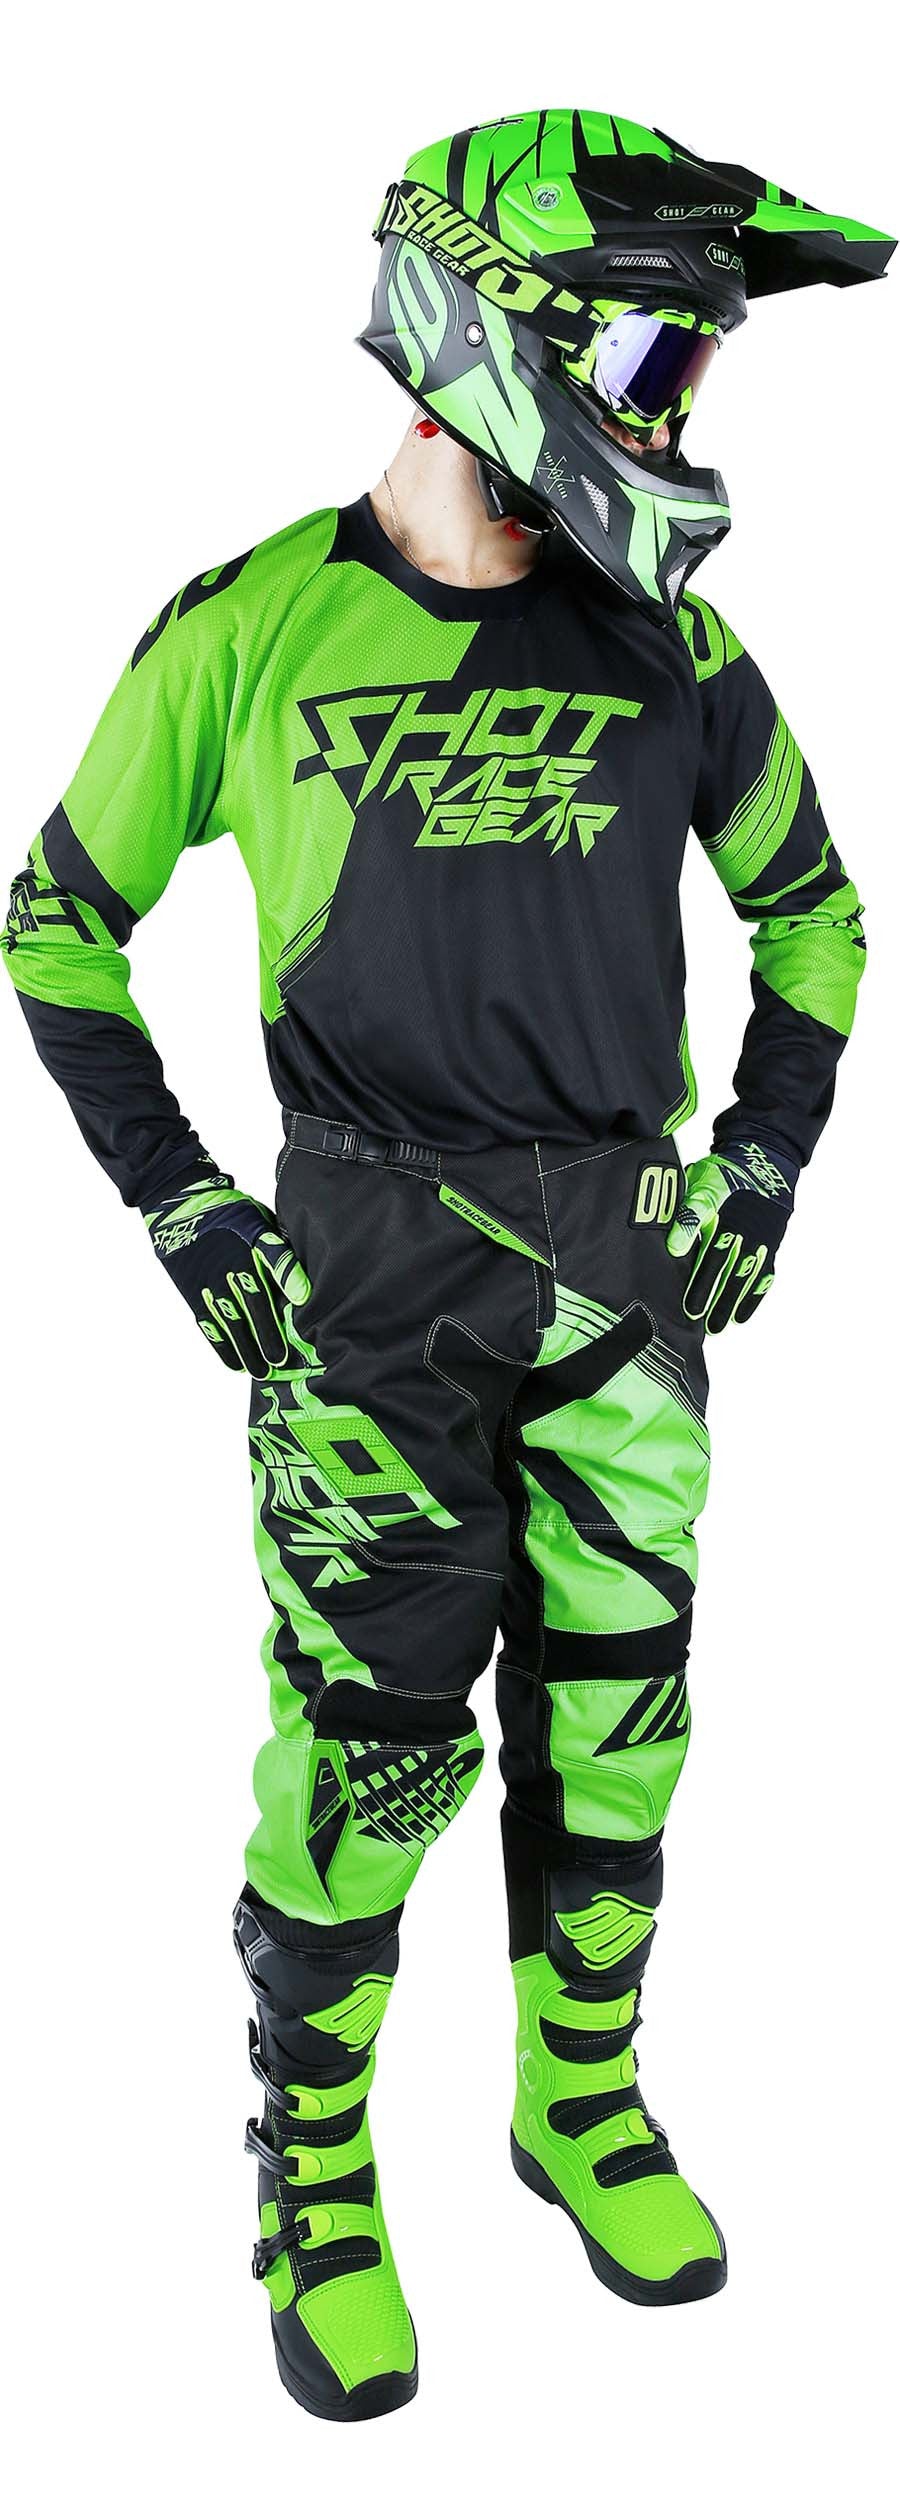 Shot MX 2017 | Contact Claw Motocross Motorcycle Race Gear